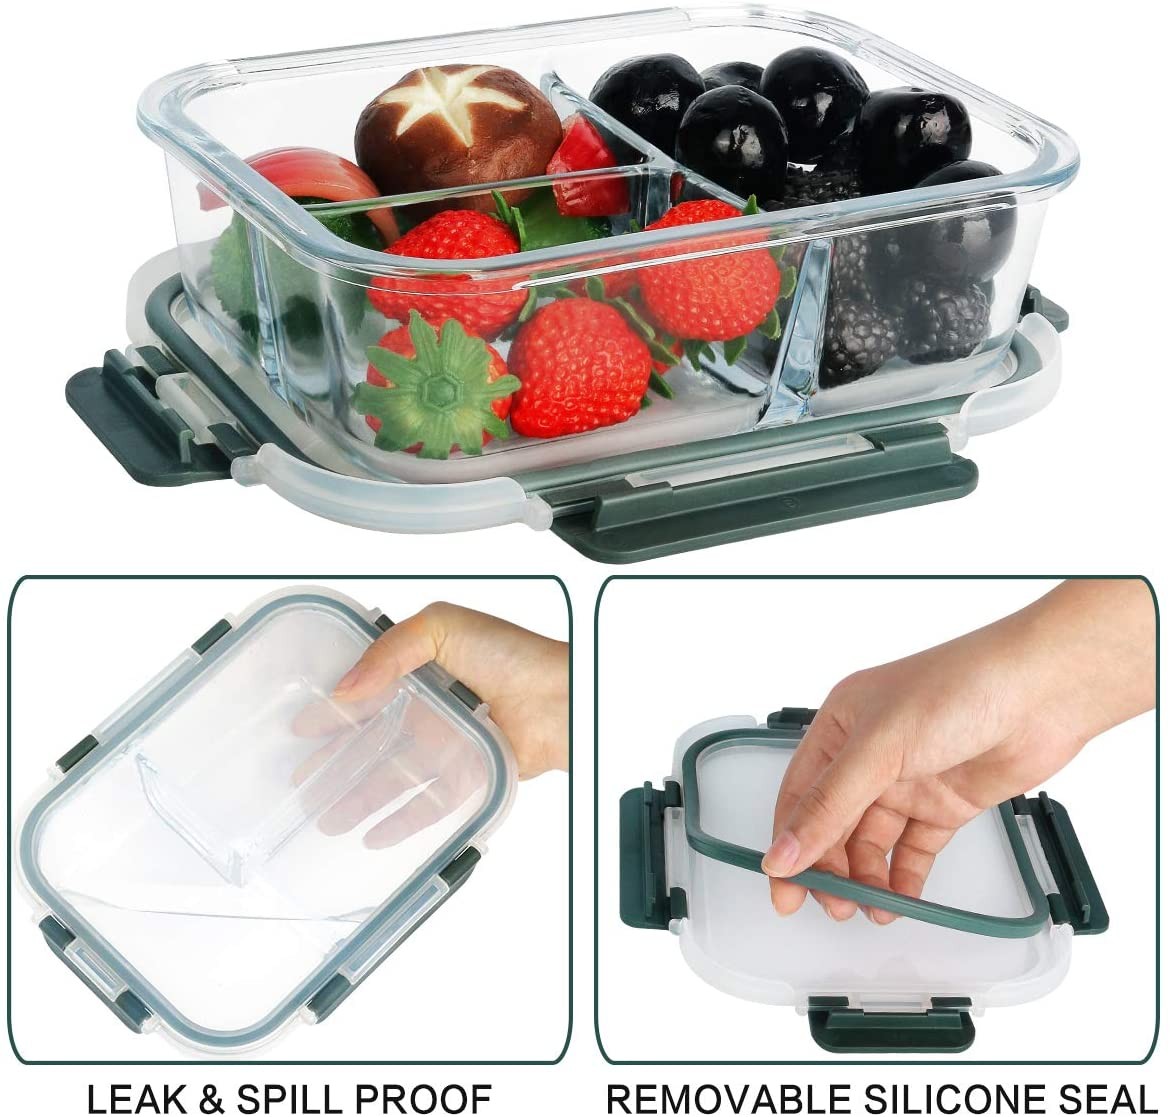 Glass Meal Prep Containers 2 Compartments, 5-Pack 36 Oz Airtight